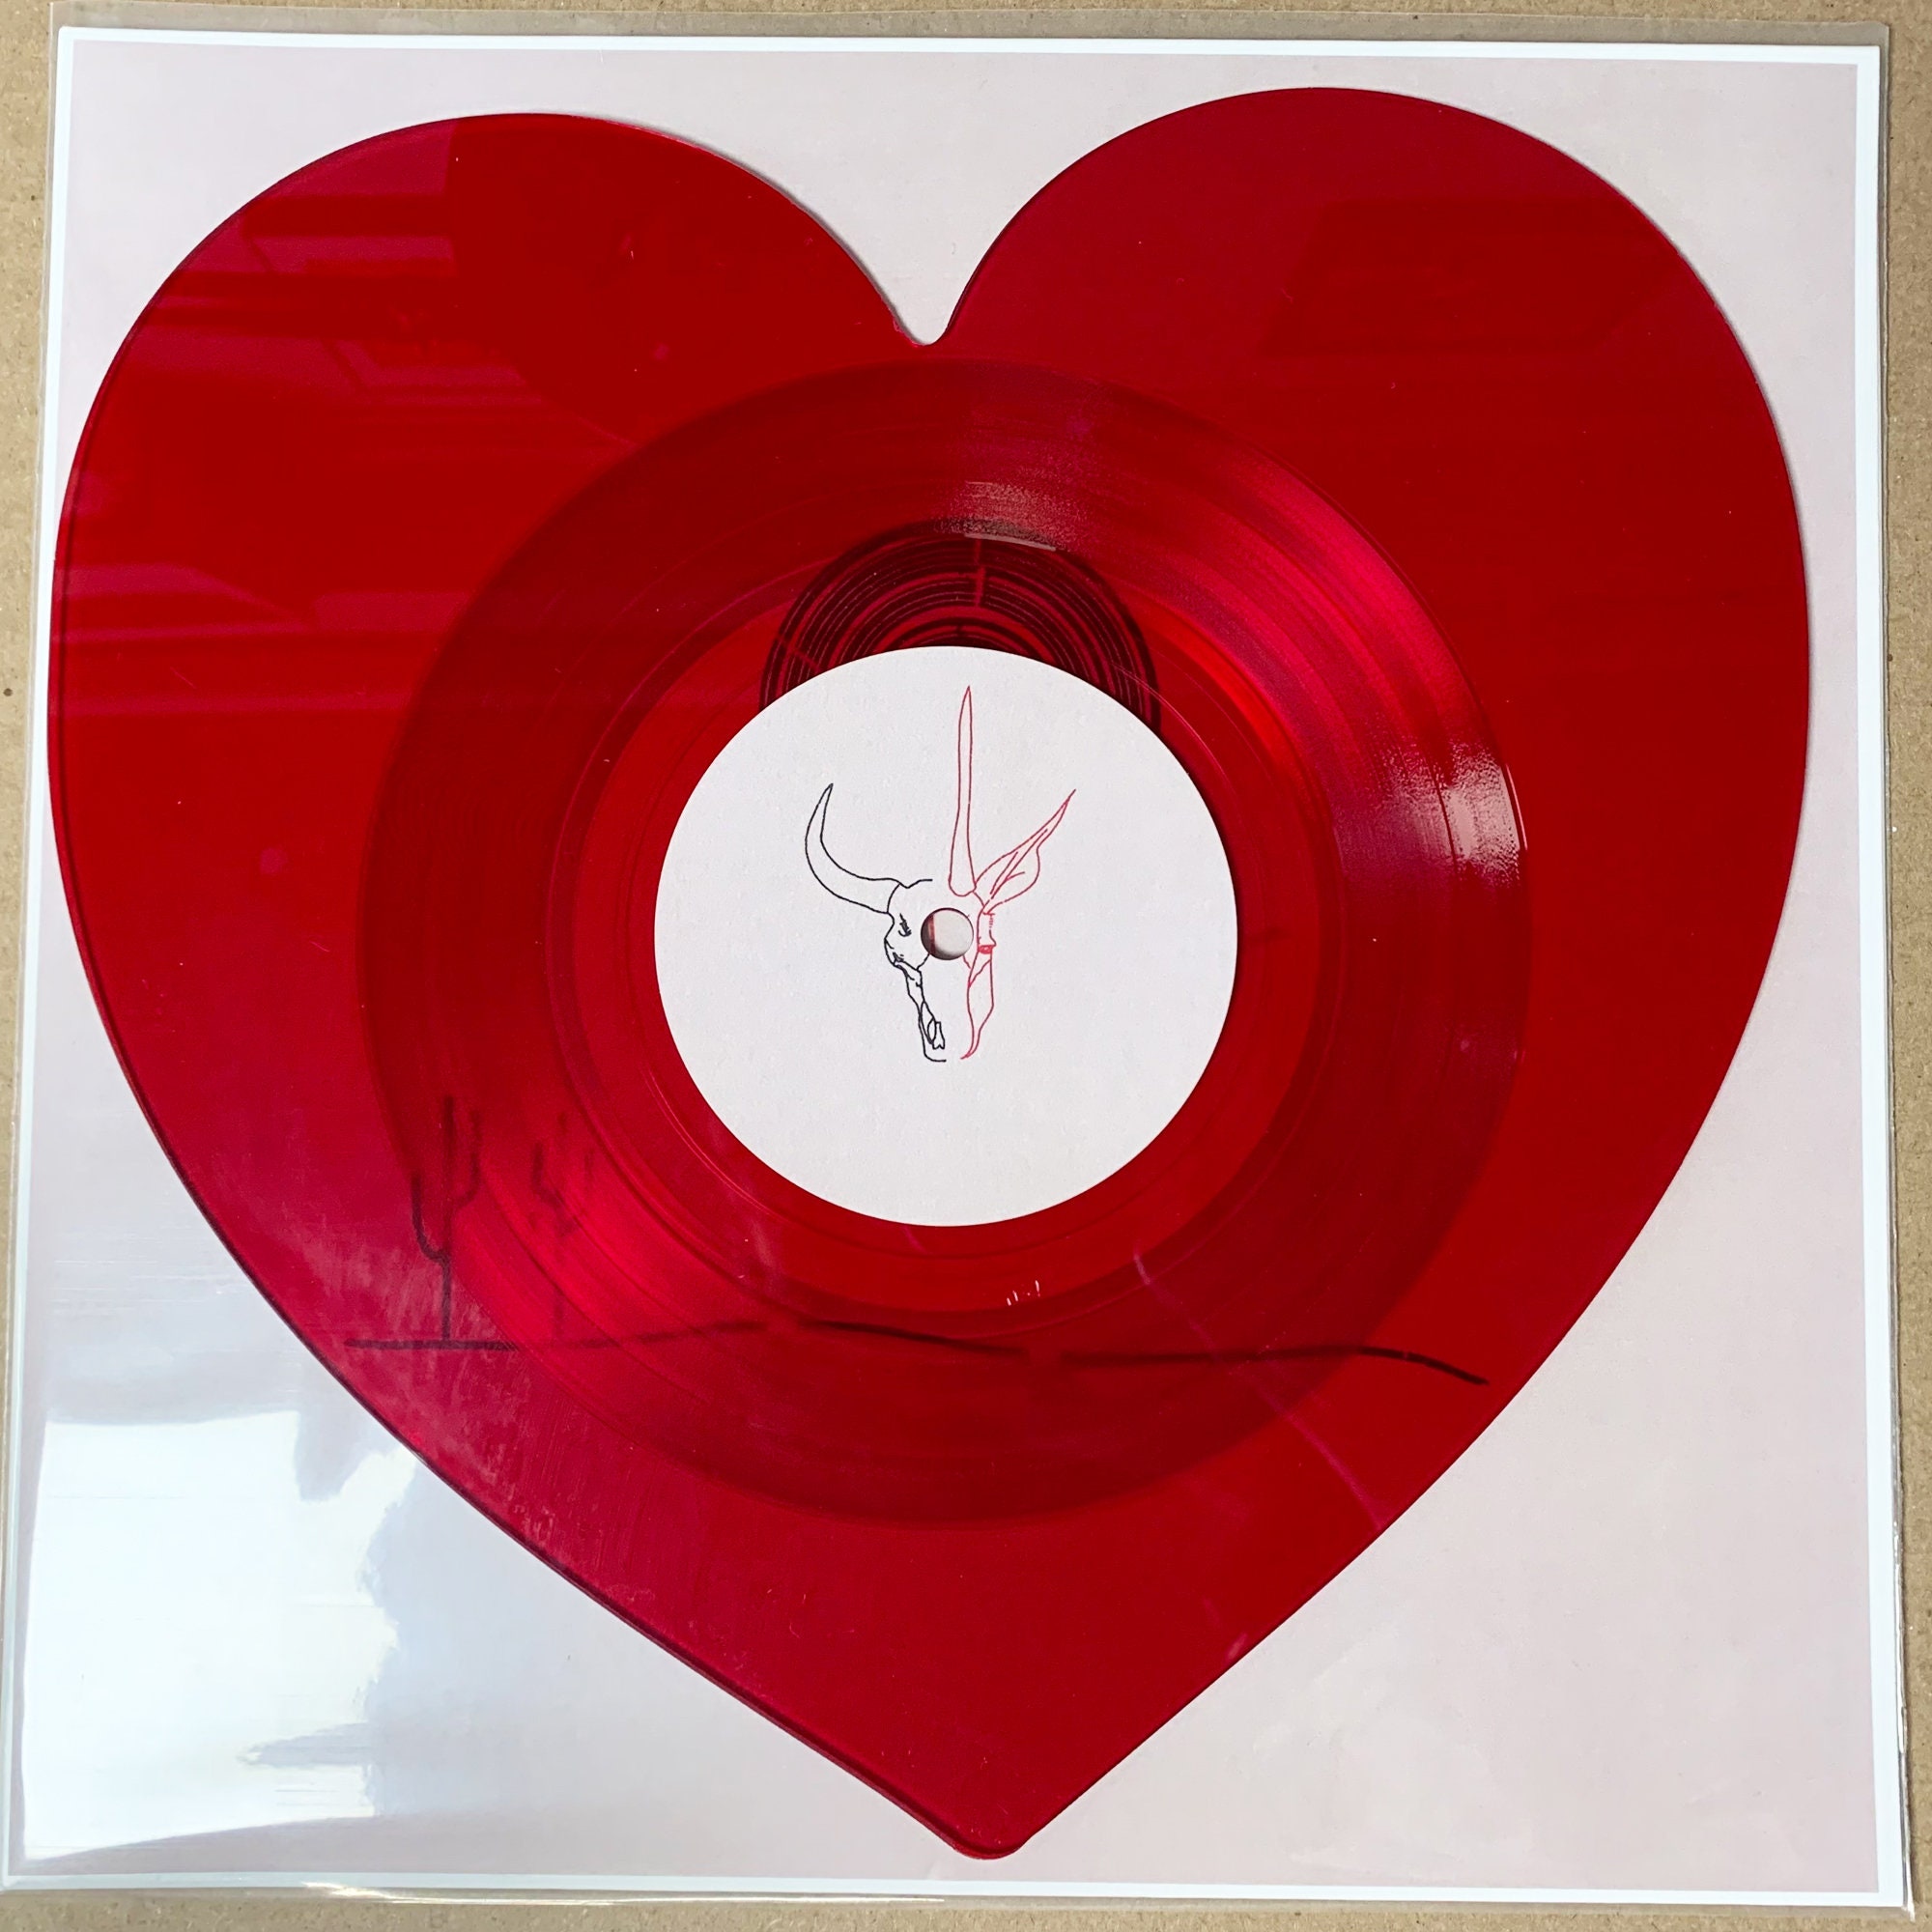 12 RED Translucent Custom Vinyl Record Two Sided LIMITED up to 6